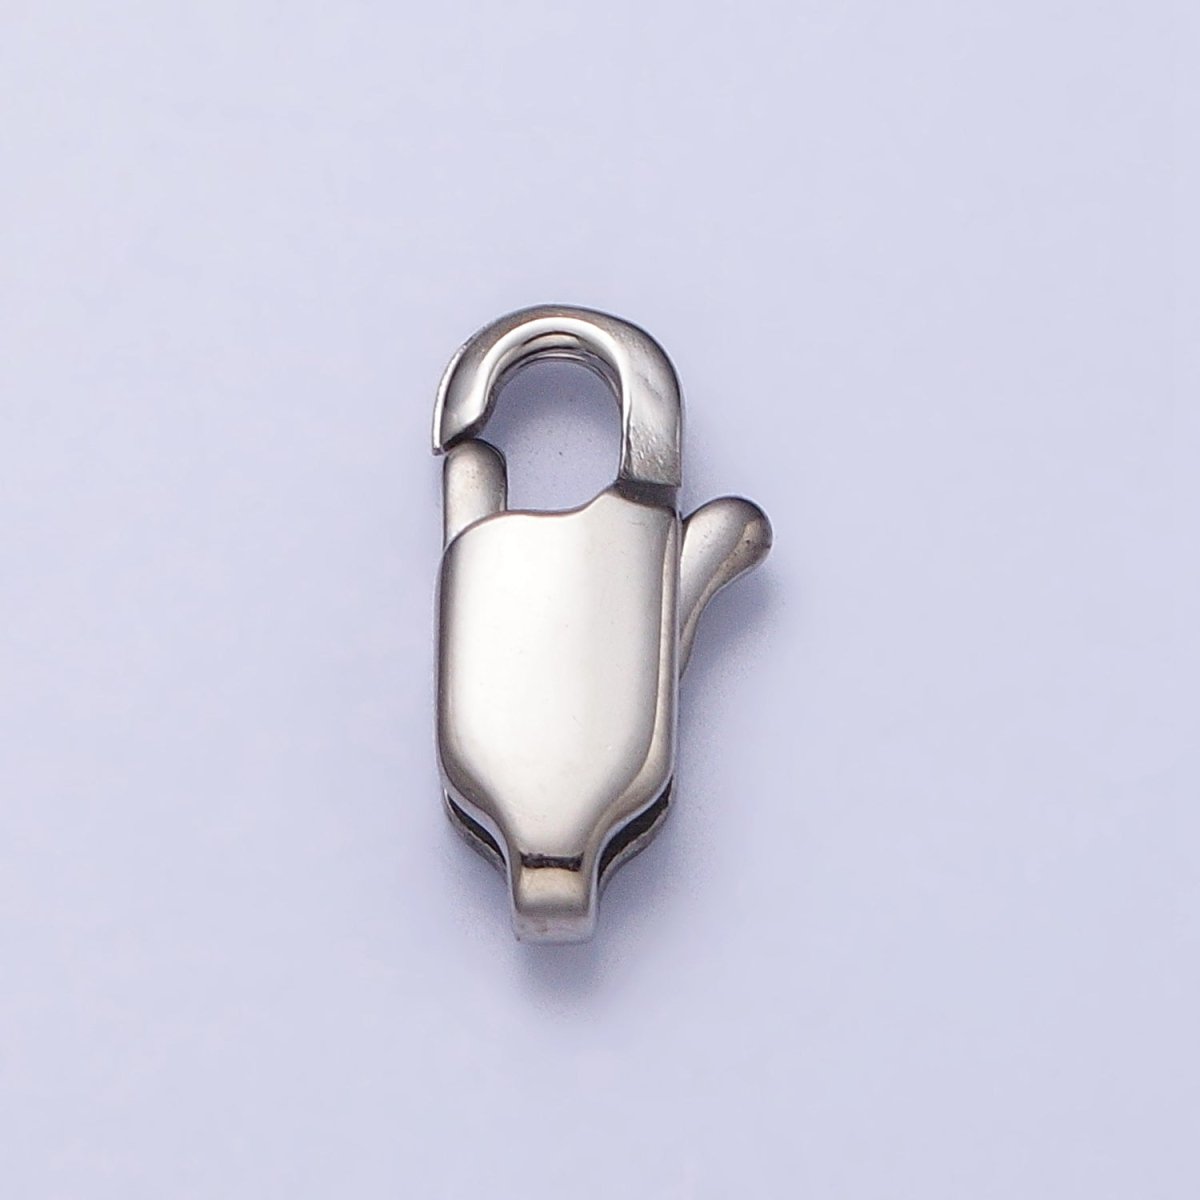 Stainless Steel 18mm, 15mm, 13mm, 11mm Lobster Clasps Silver Jewelry-Making Closure Supply | Z314 - Z317 - DLUXCA